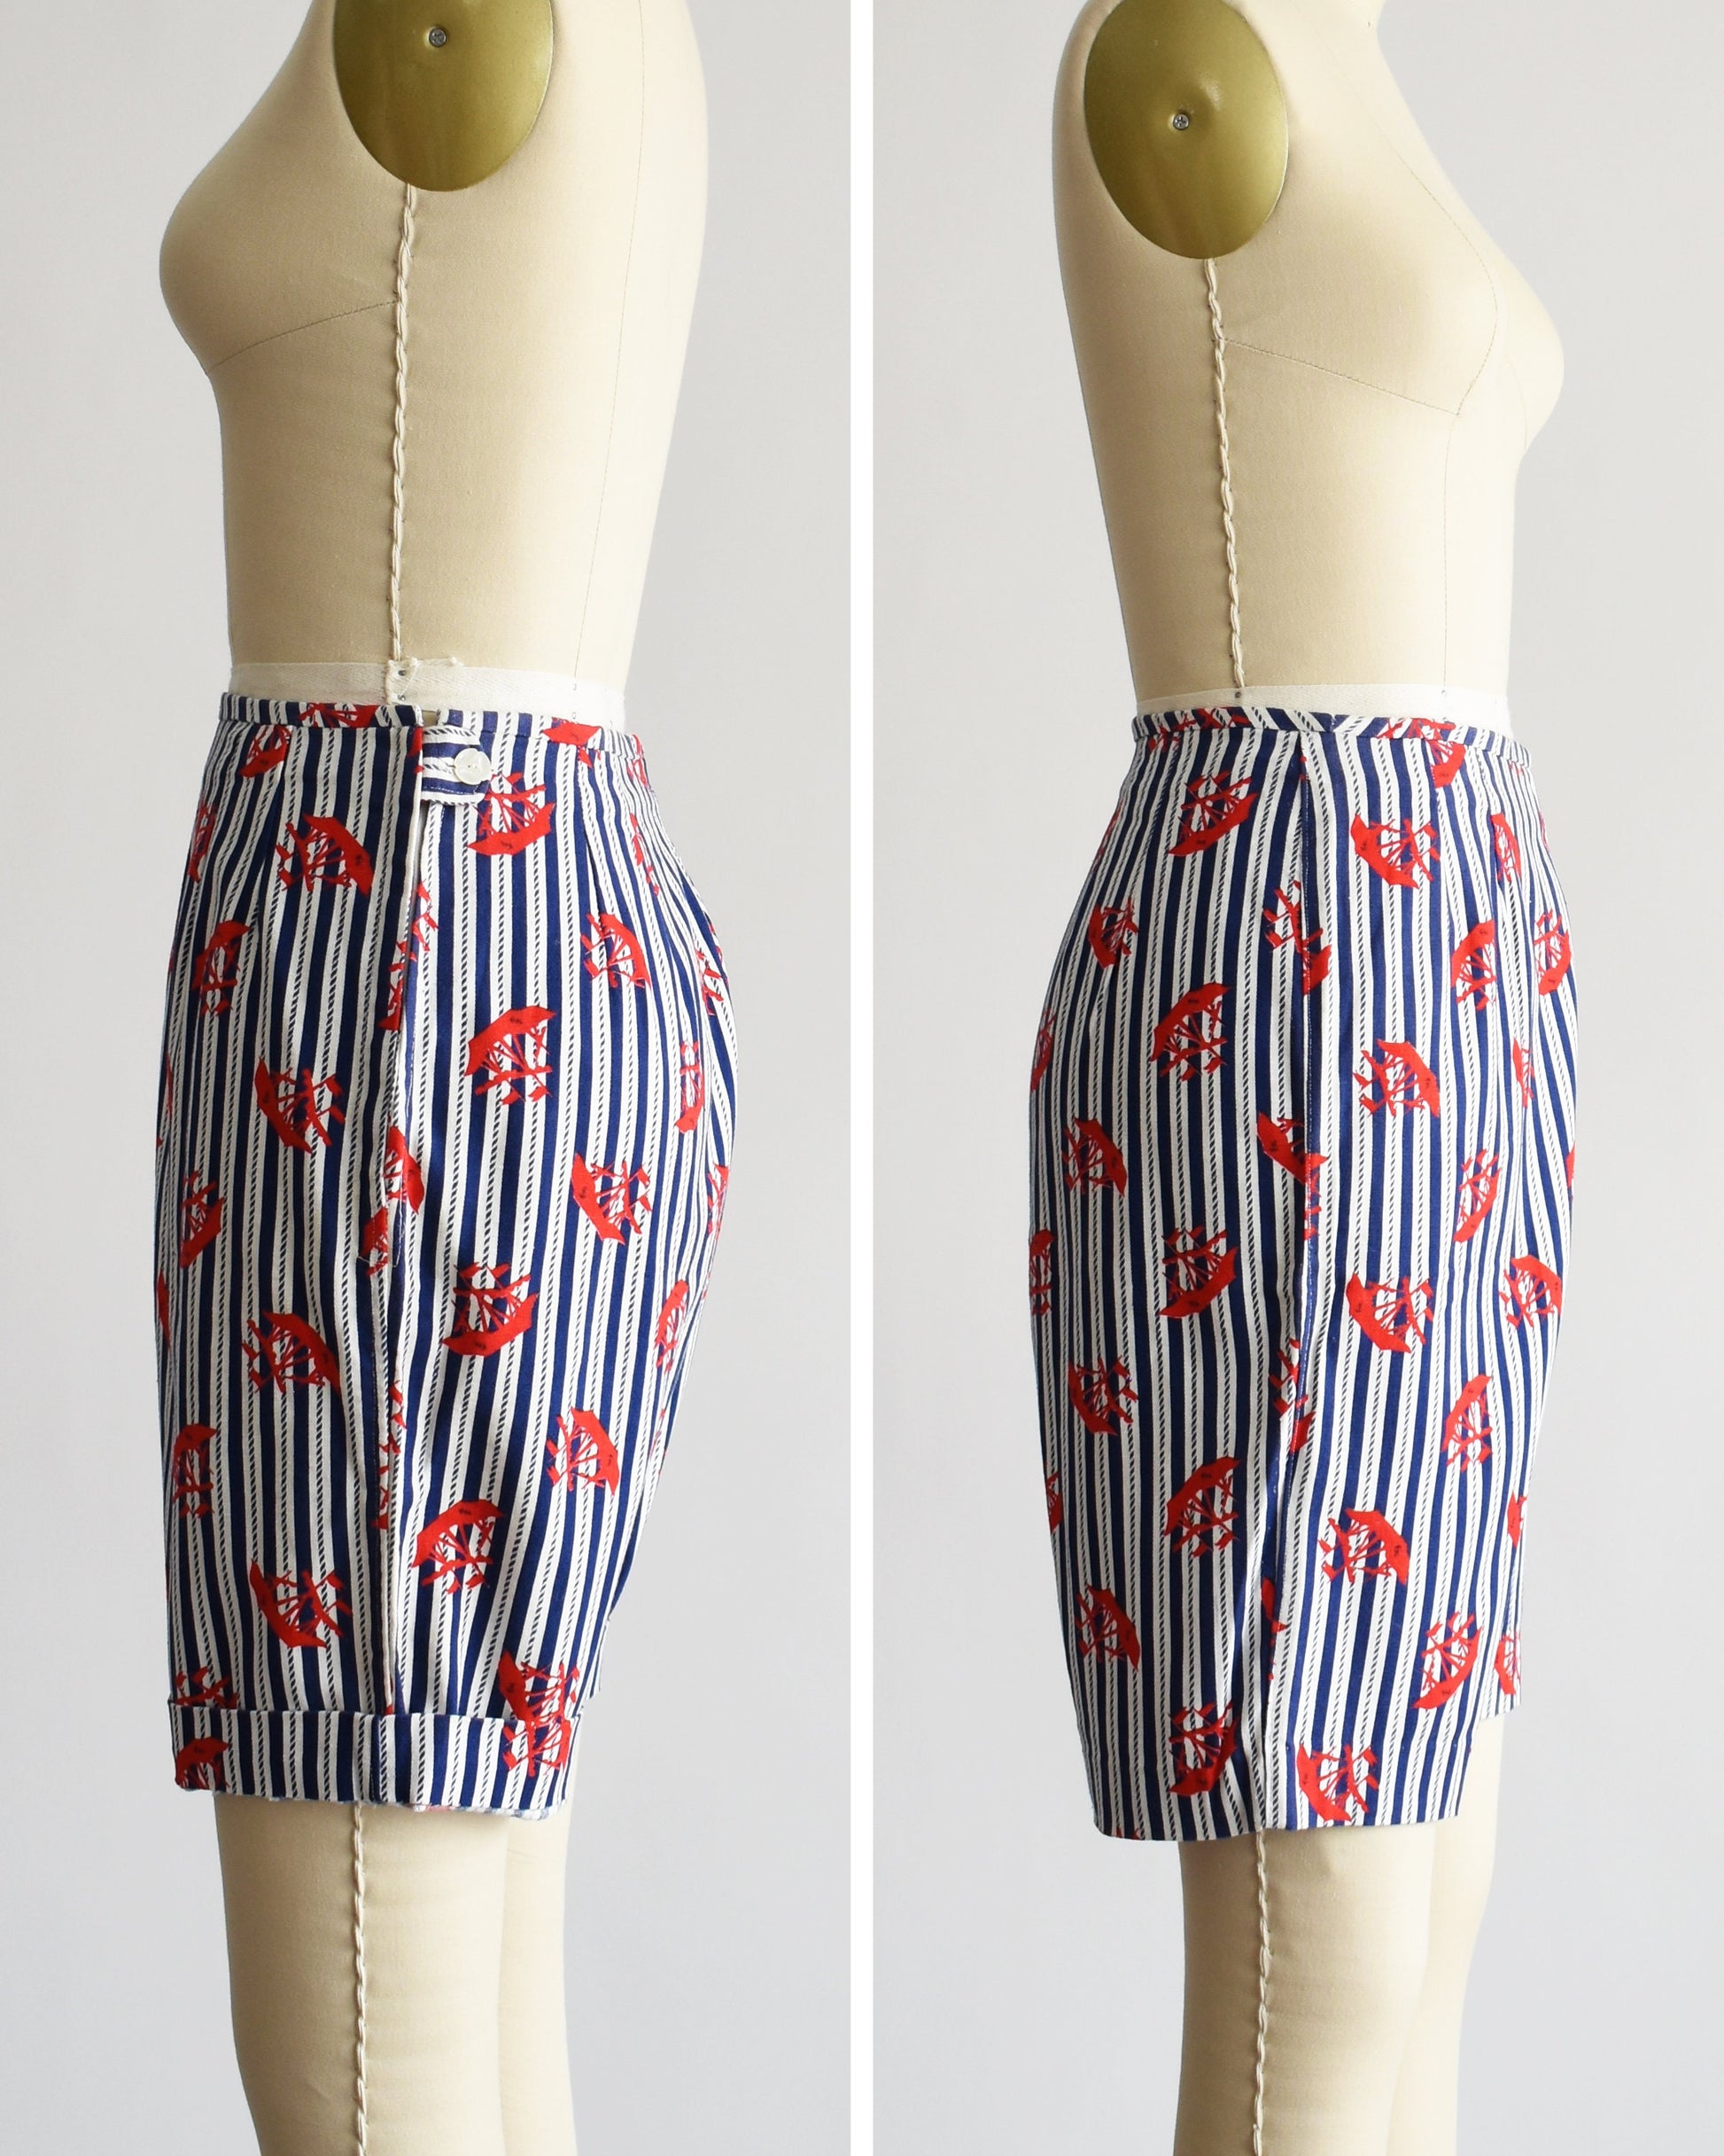 Side by side view of a pair of vintage 60s shorts that are navy blue and white vertical striped with a red clipper ship print. The shorts are modeled on a dress form. The shorts are cuffed on the left and not on the right.